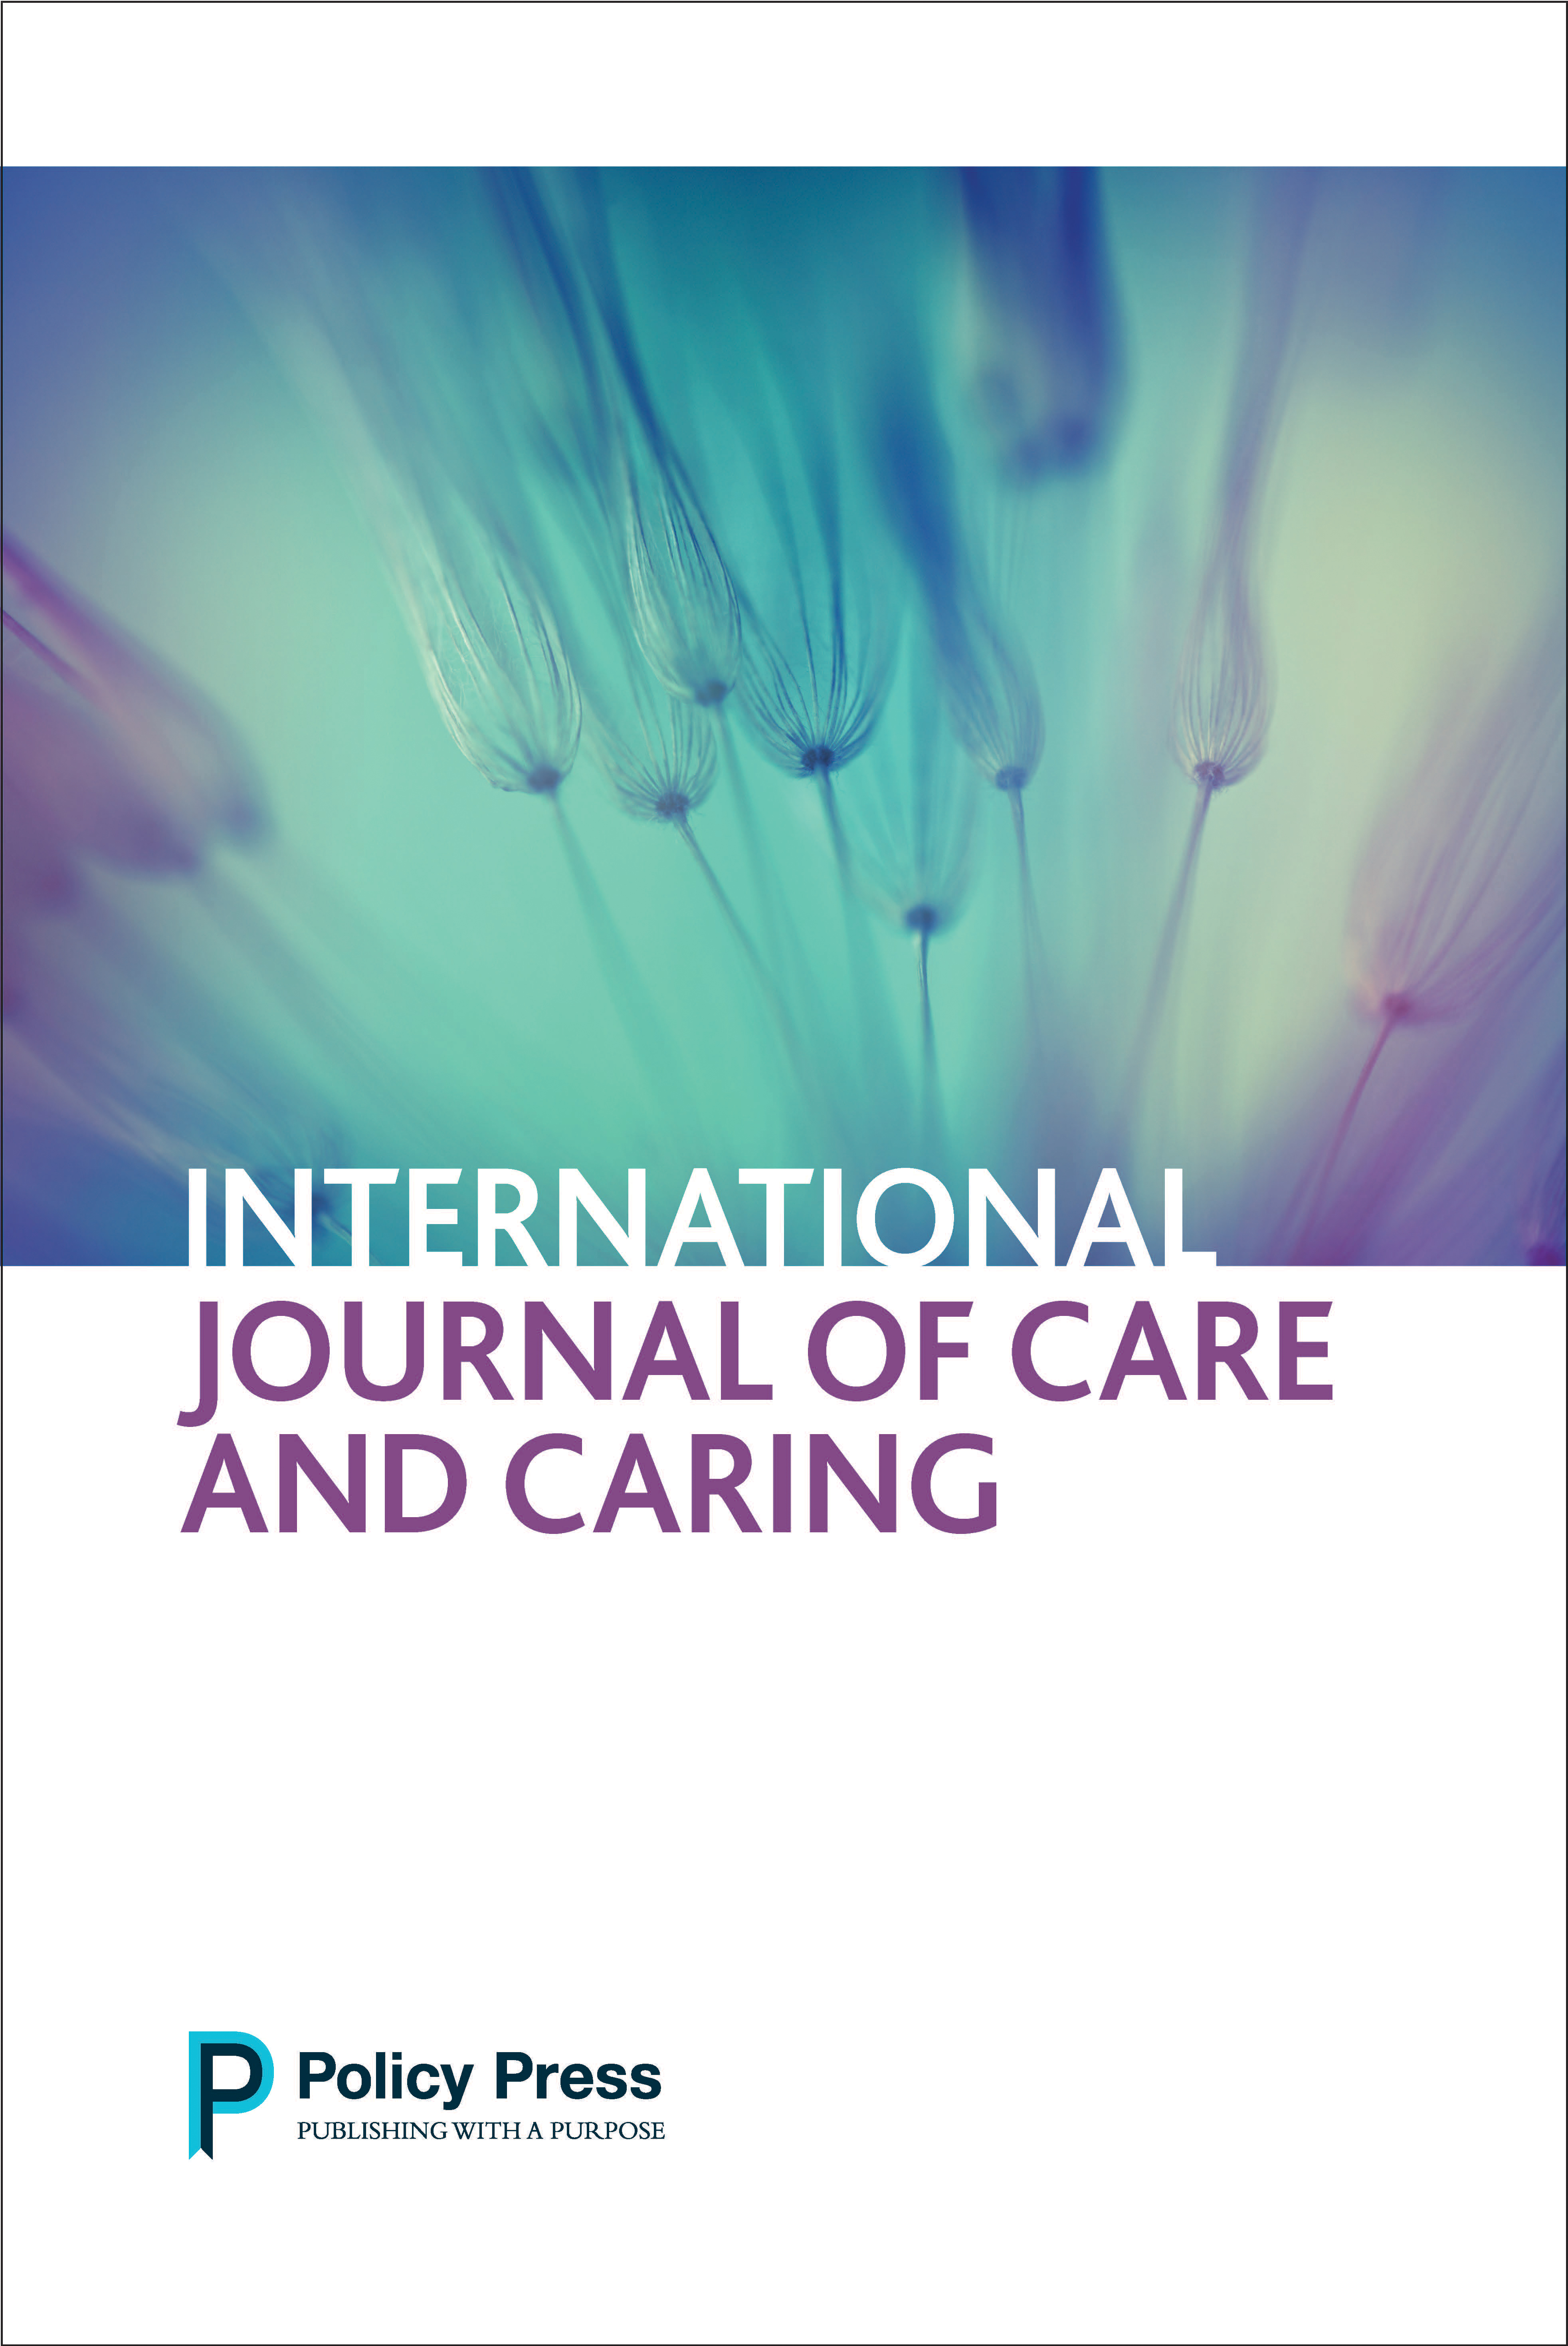 International Journal of Care and Caring coming in 2017